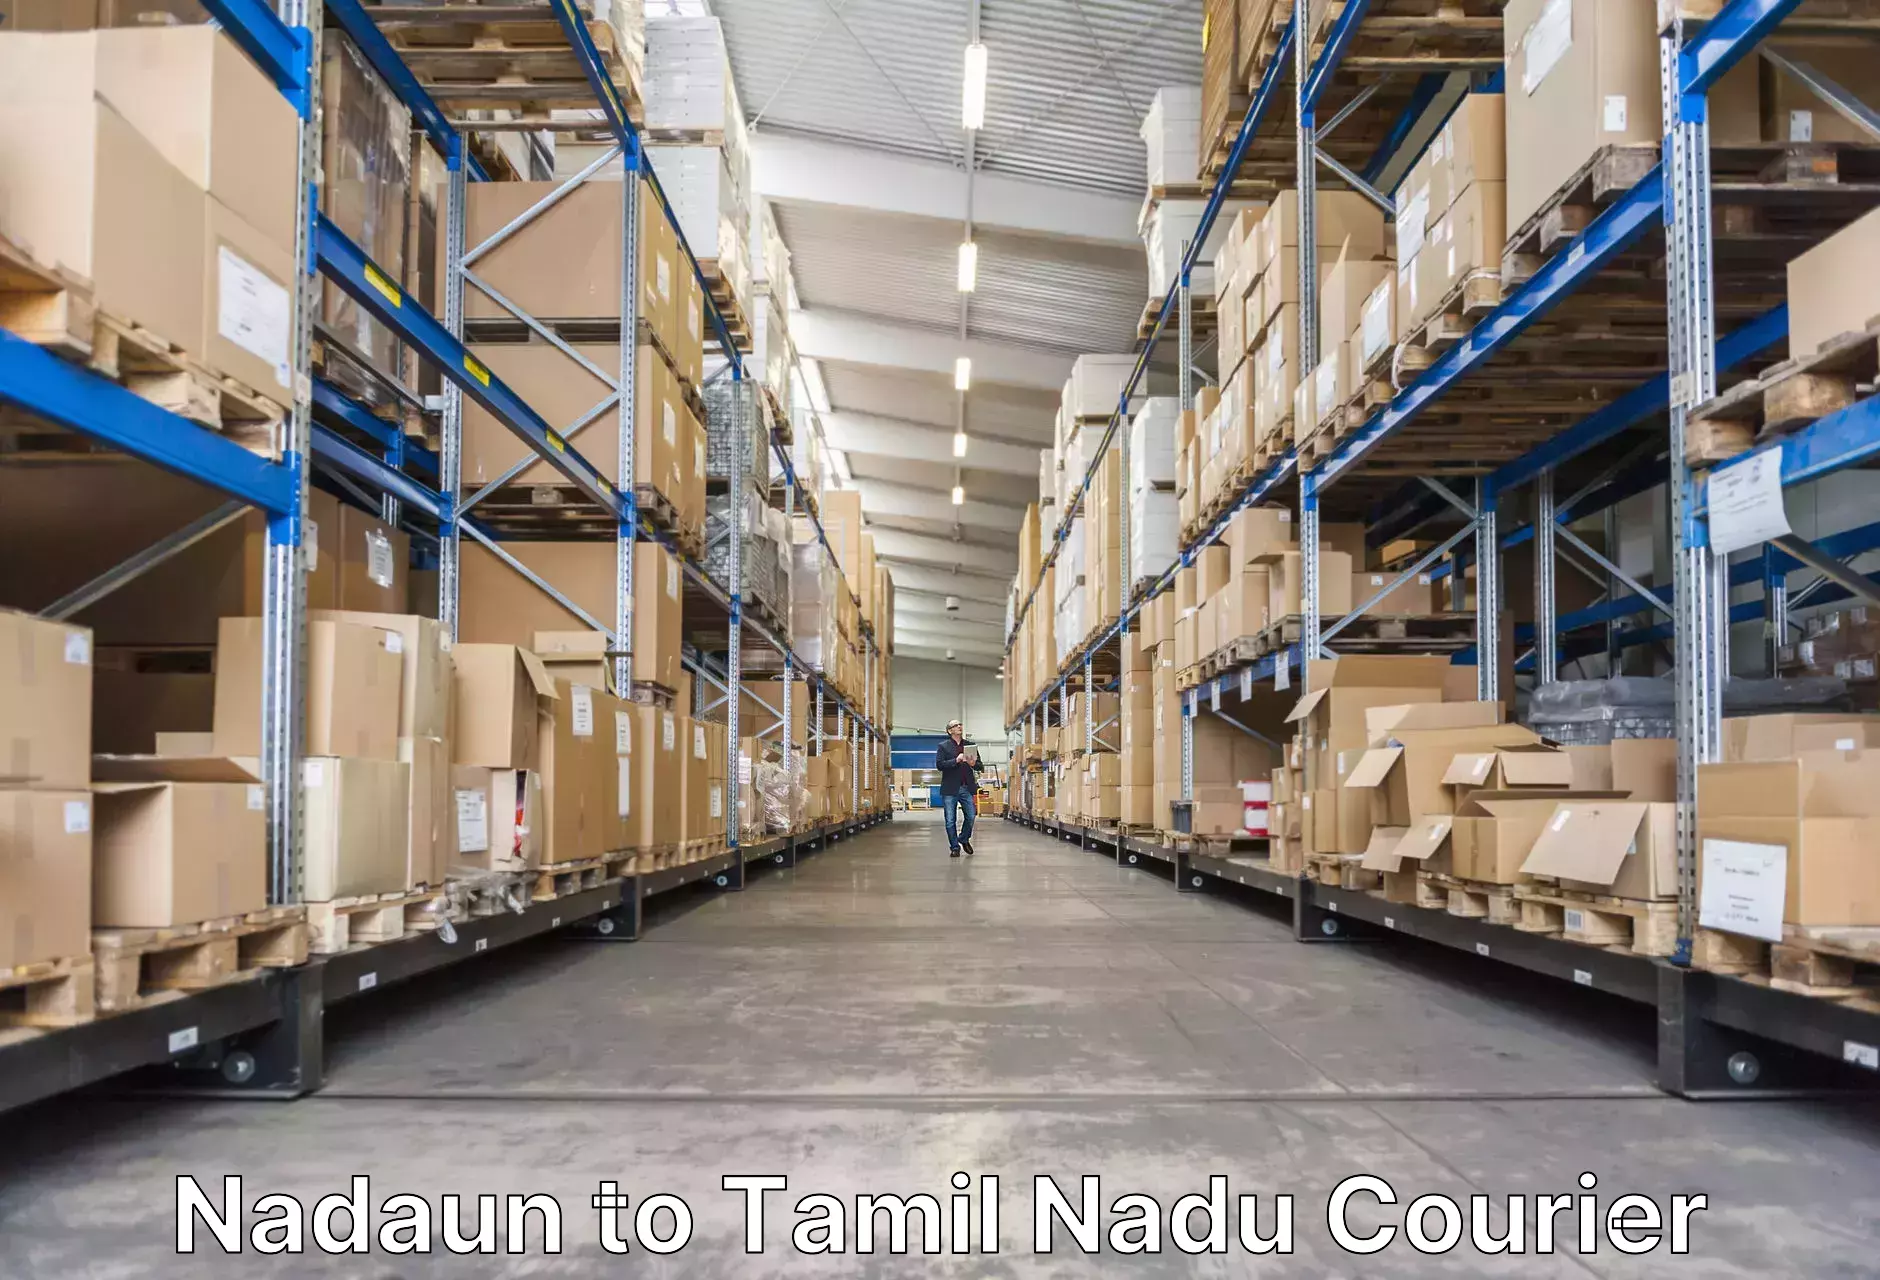 Hassle-free luggage shipping Nadaun to Meenakshi Academy of Higher Education and Research Chennai